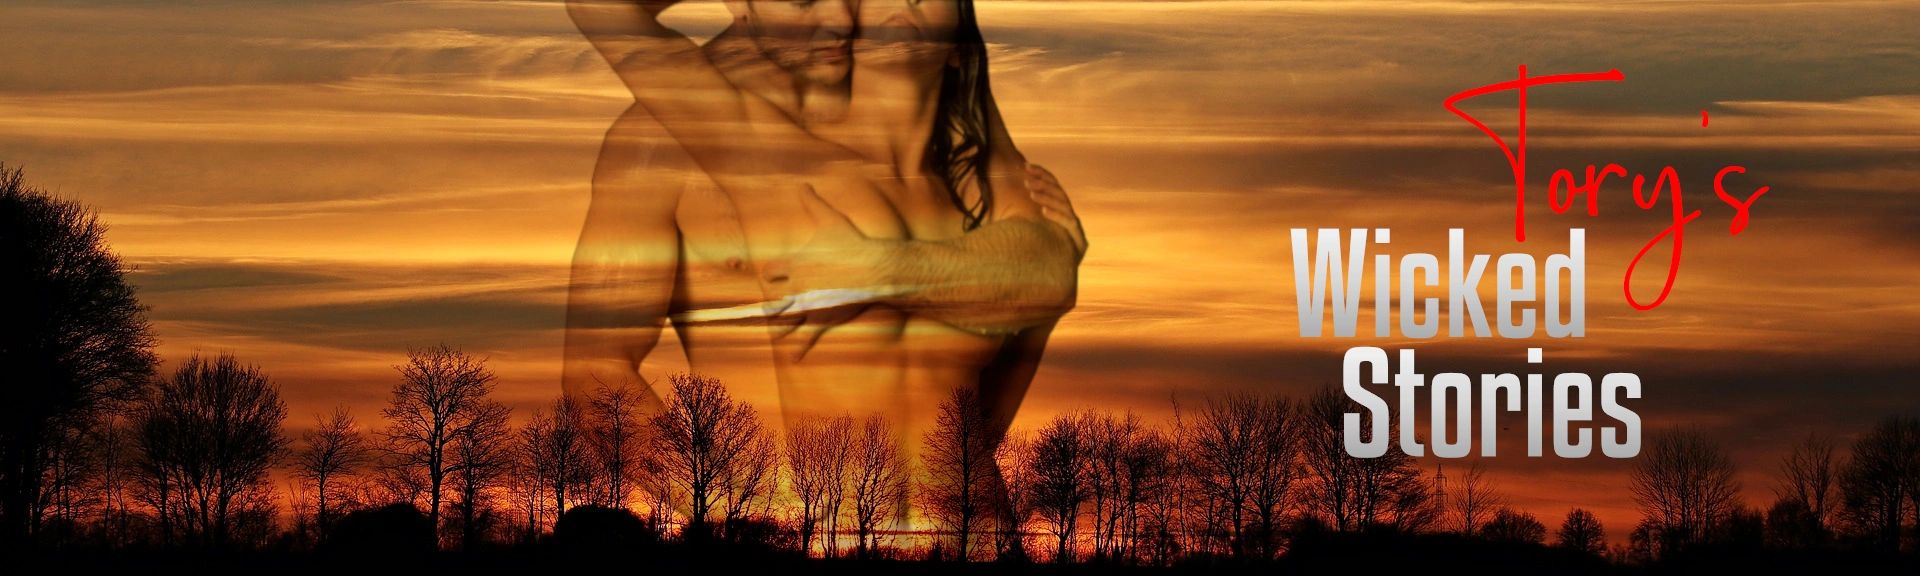 man with his arm around a woman's breast area, man and woman naked torso, background of trees & sky